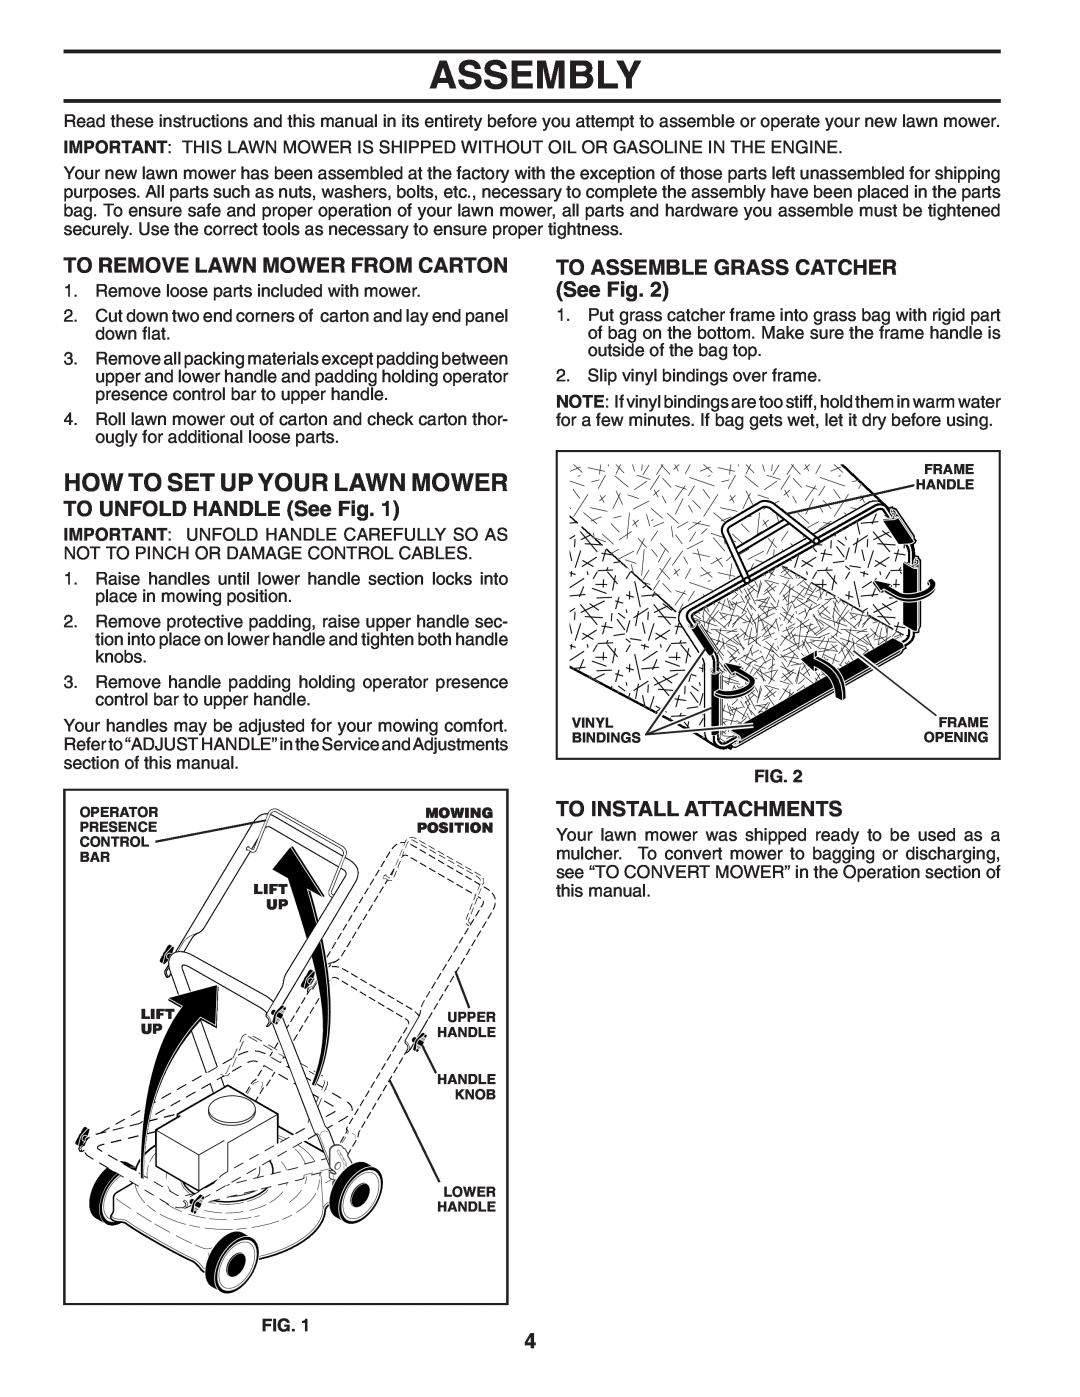 Husqvarna 6521CM Assembly, How To Set Up Your Lawn Mower, To Remove Lawn Mower From Carton, TO UNFOLD HANDLE See Fig 